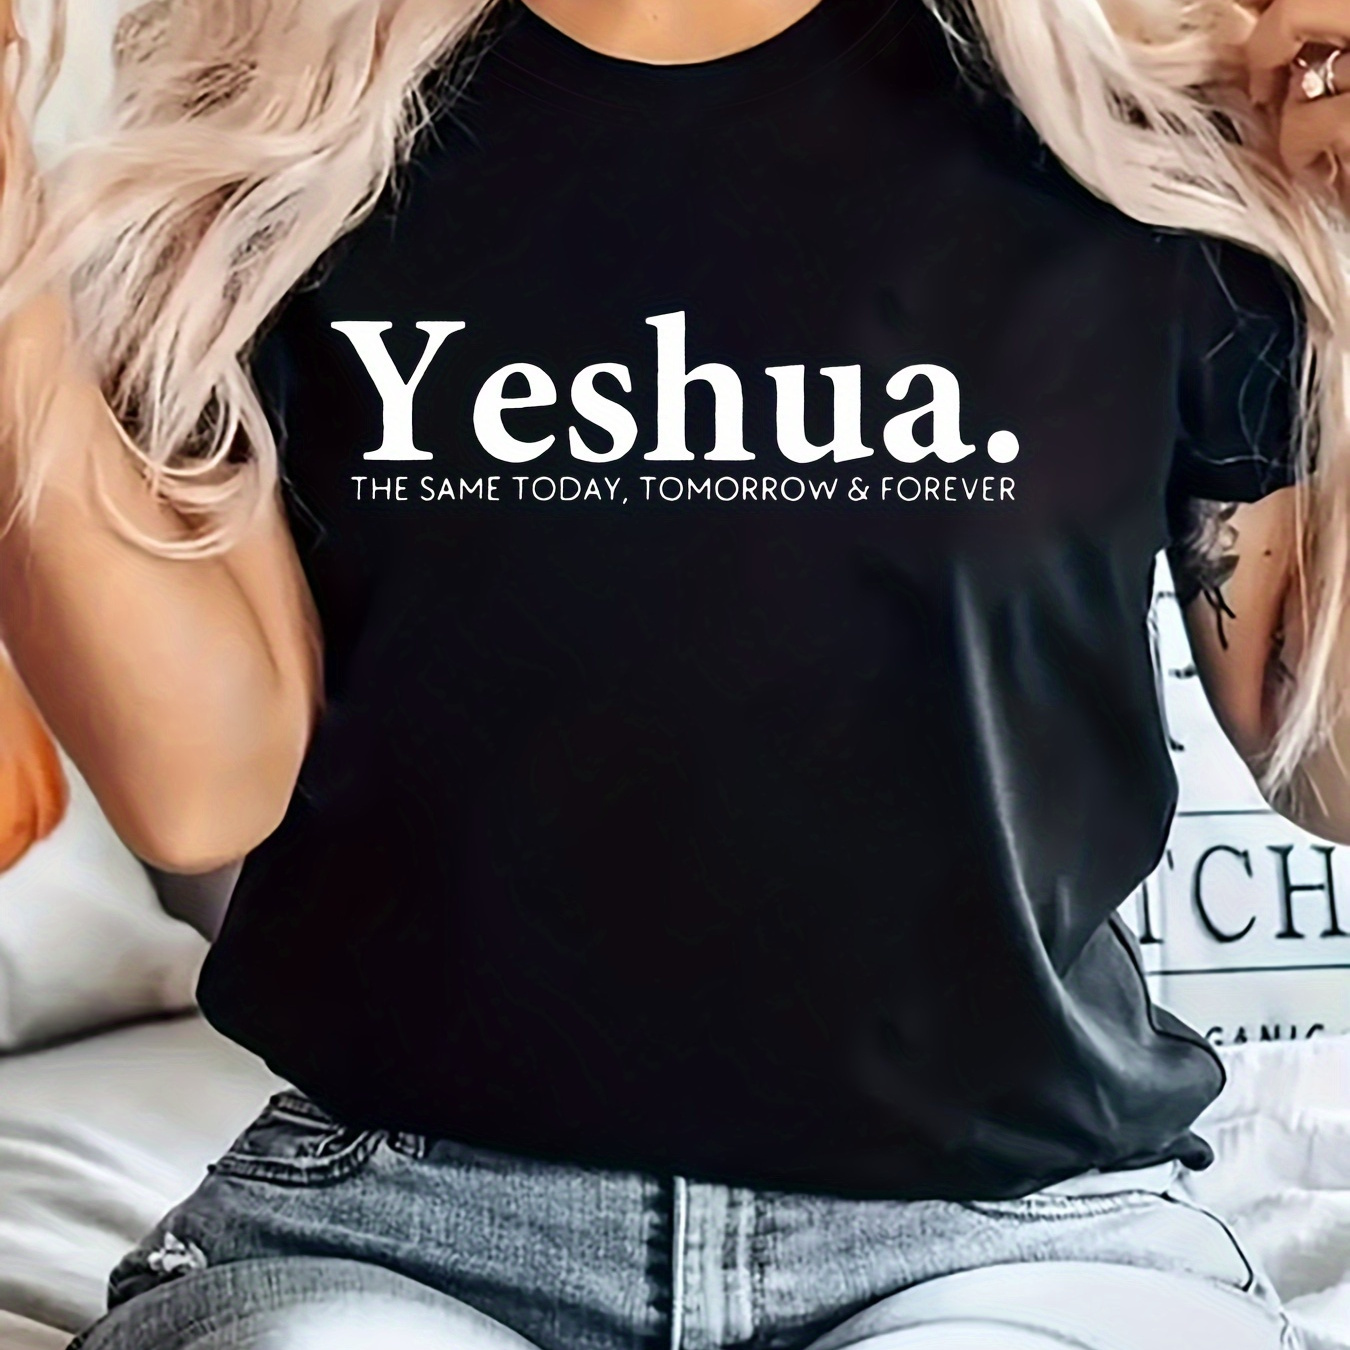 

Yeshua Letter Print T-shirt, Short Sleeve Crew Neck Casual Top For Summer & Spring, Women's Clothing